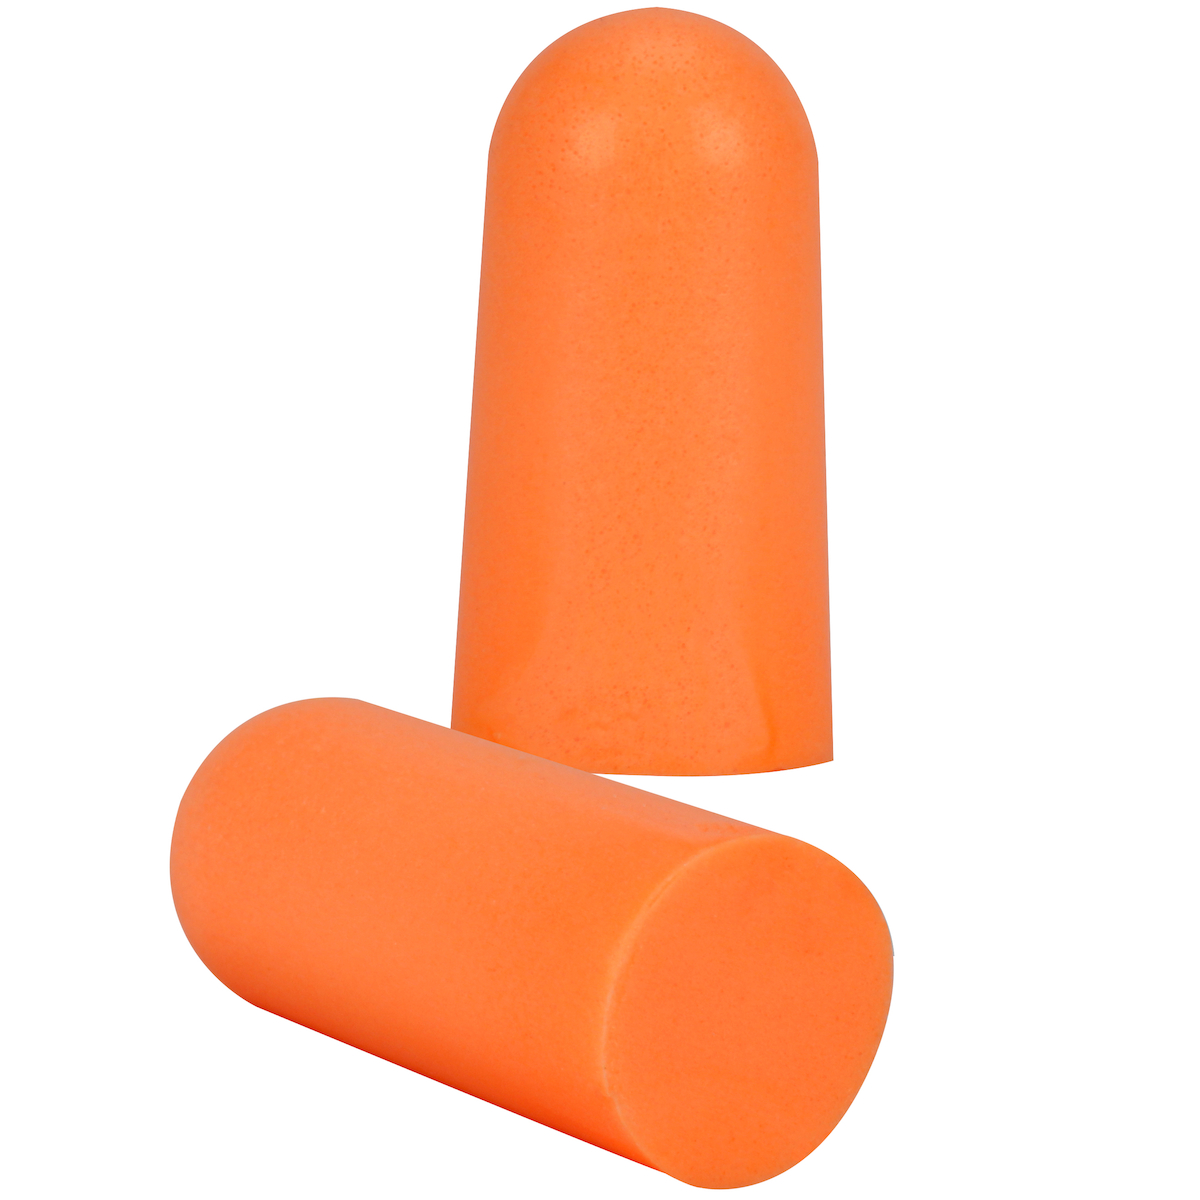 Pip Mega Bullet Plus Disposable Soft Foam Ear Plugs from Columbia Safety